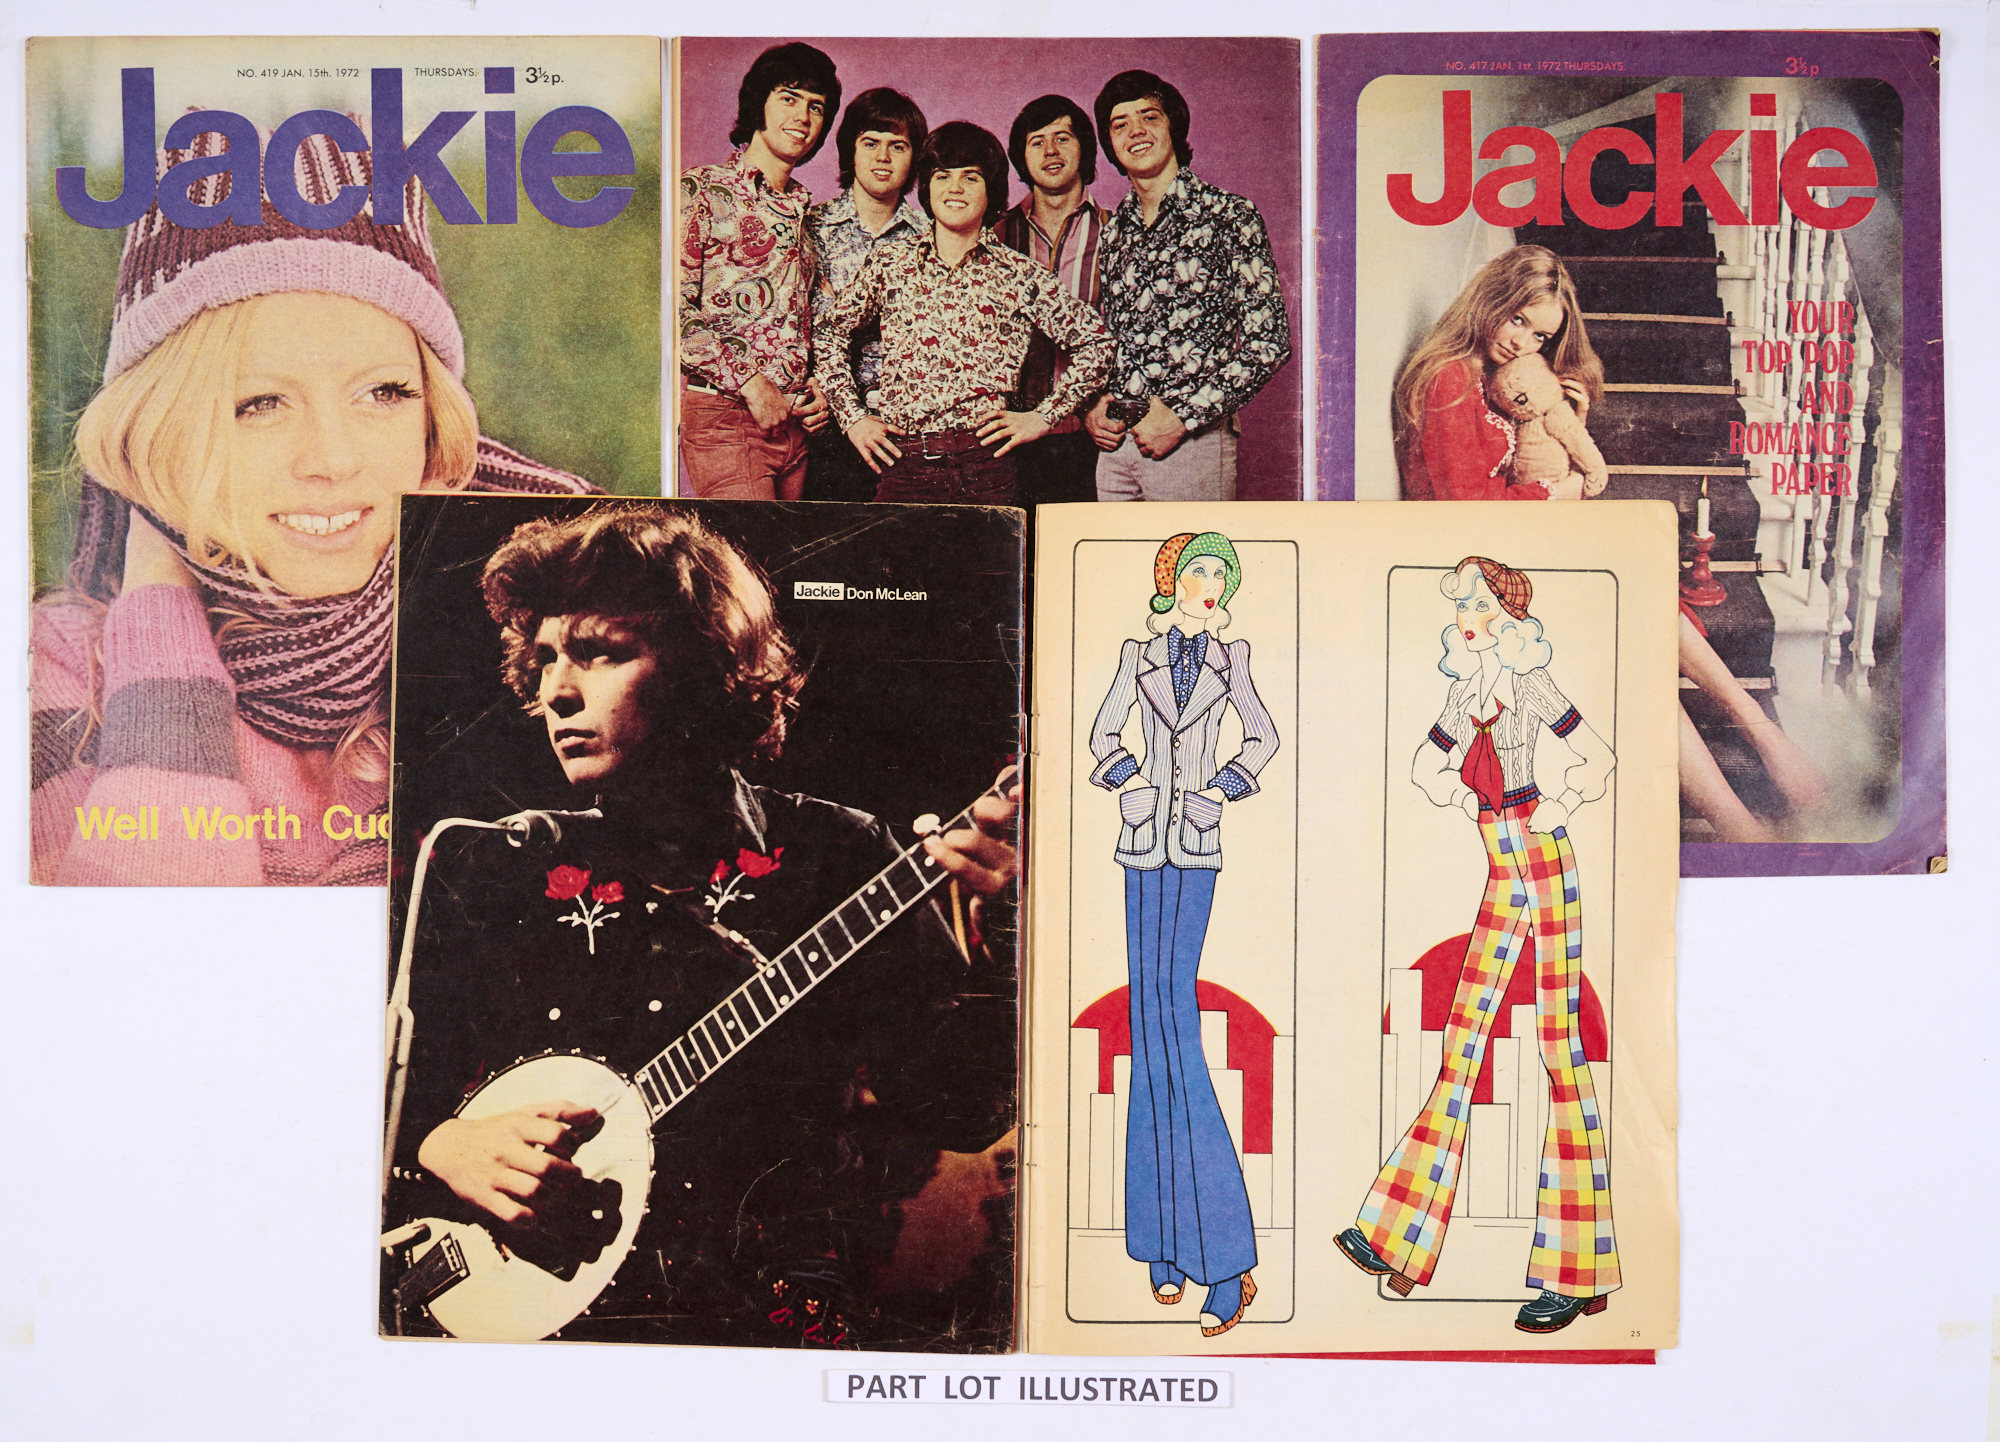 Jackie Magazine (1972-73) 55 issues between 417 (Jan 1972) - 480 (March 1973). Nos. 430, 439, 449,